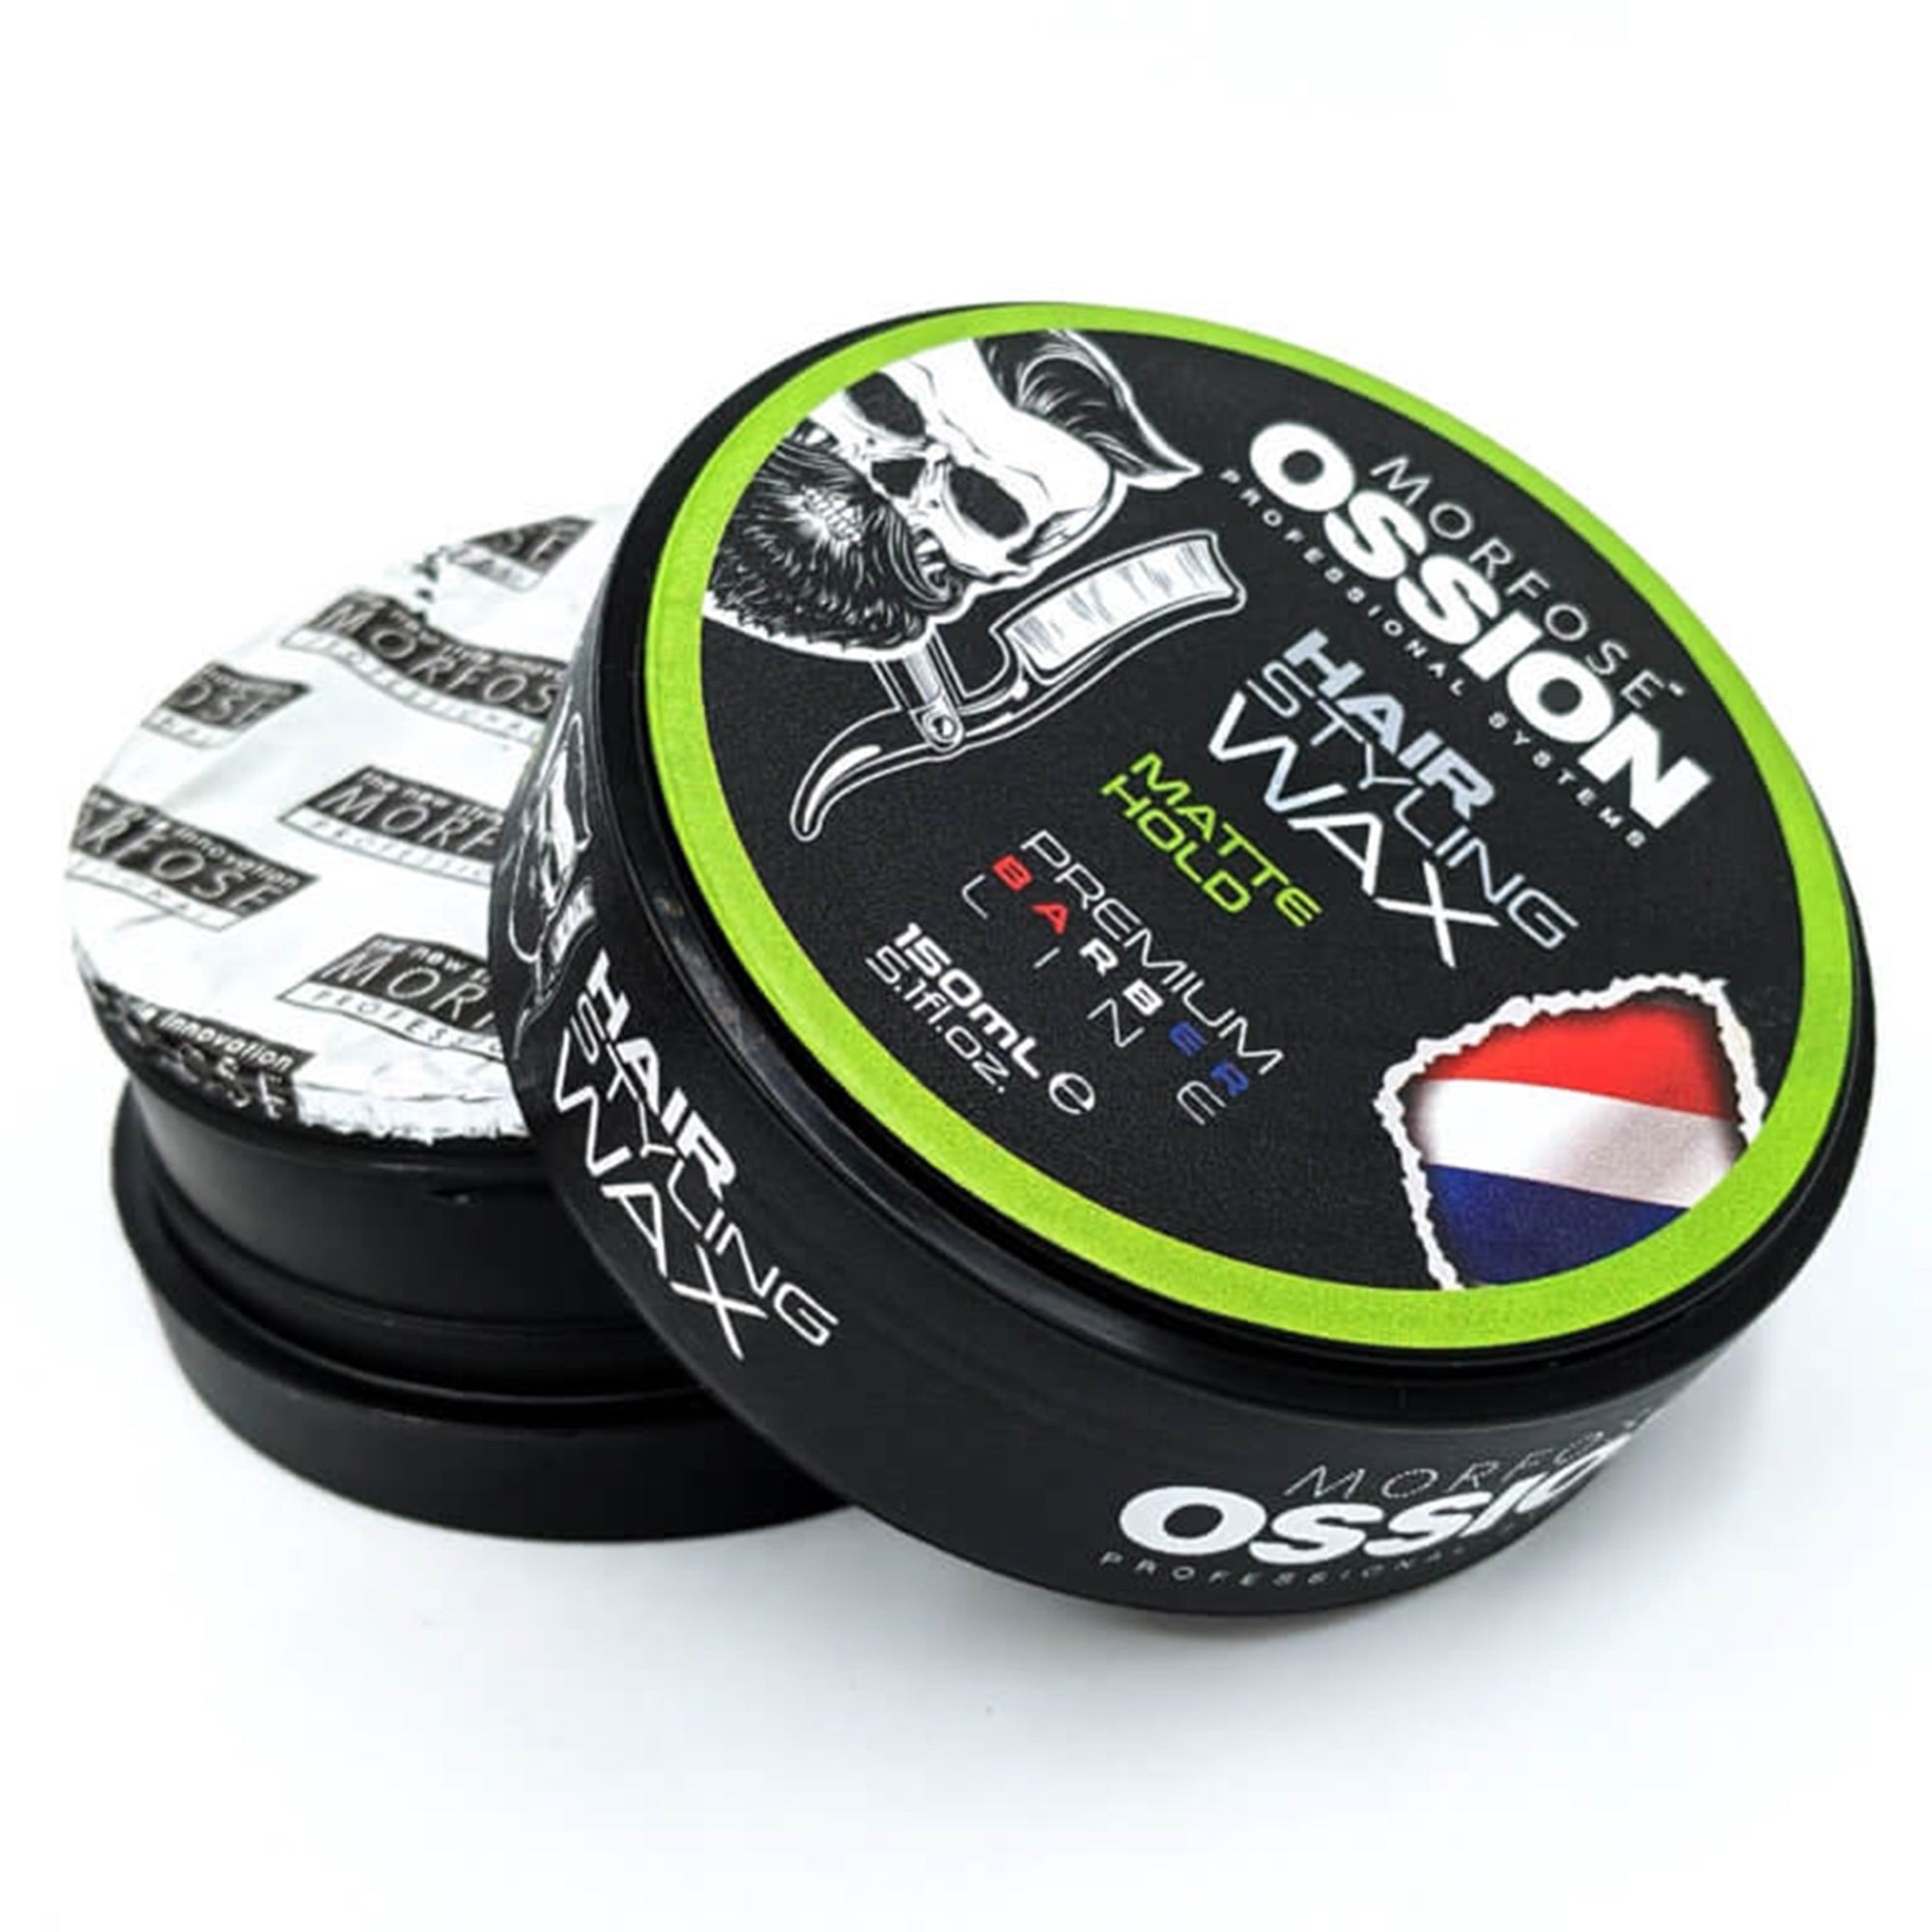 Morfose - Ossion Matte Hold Hair Styling Wax 150ml